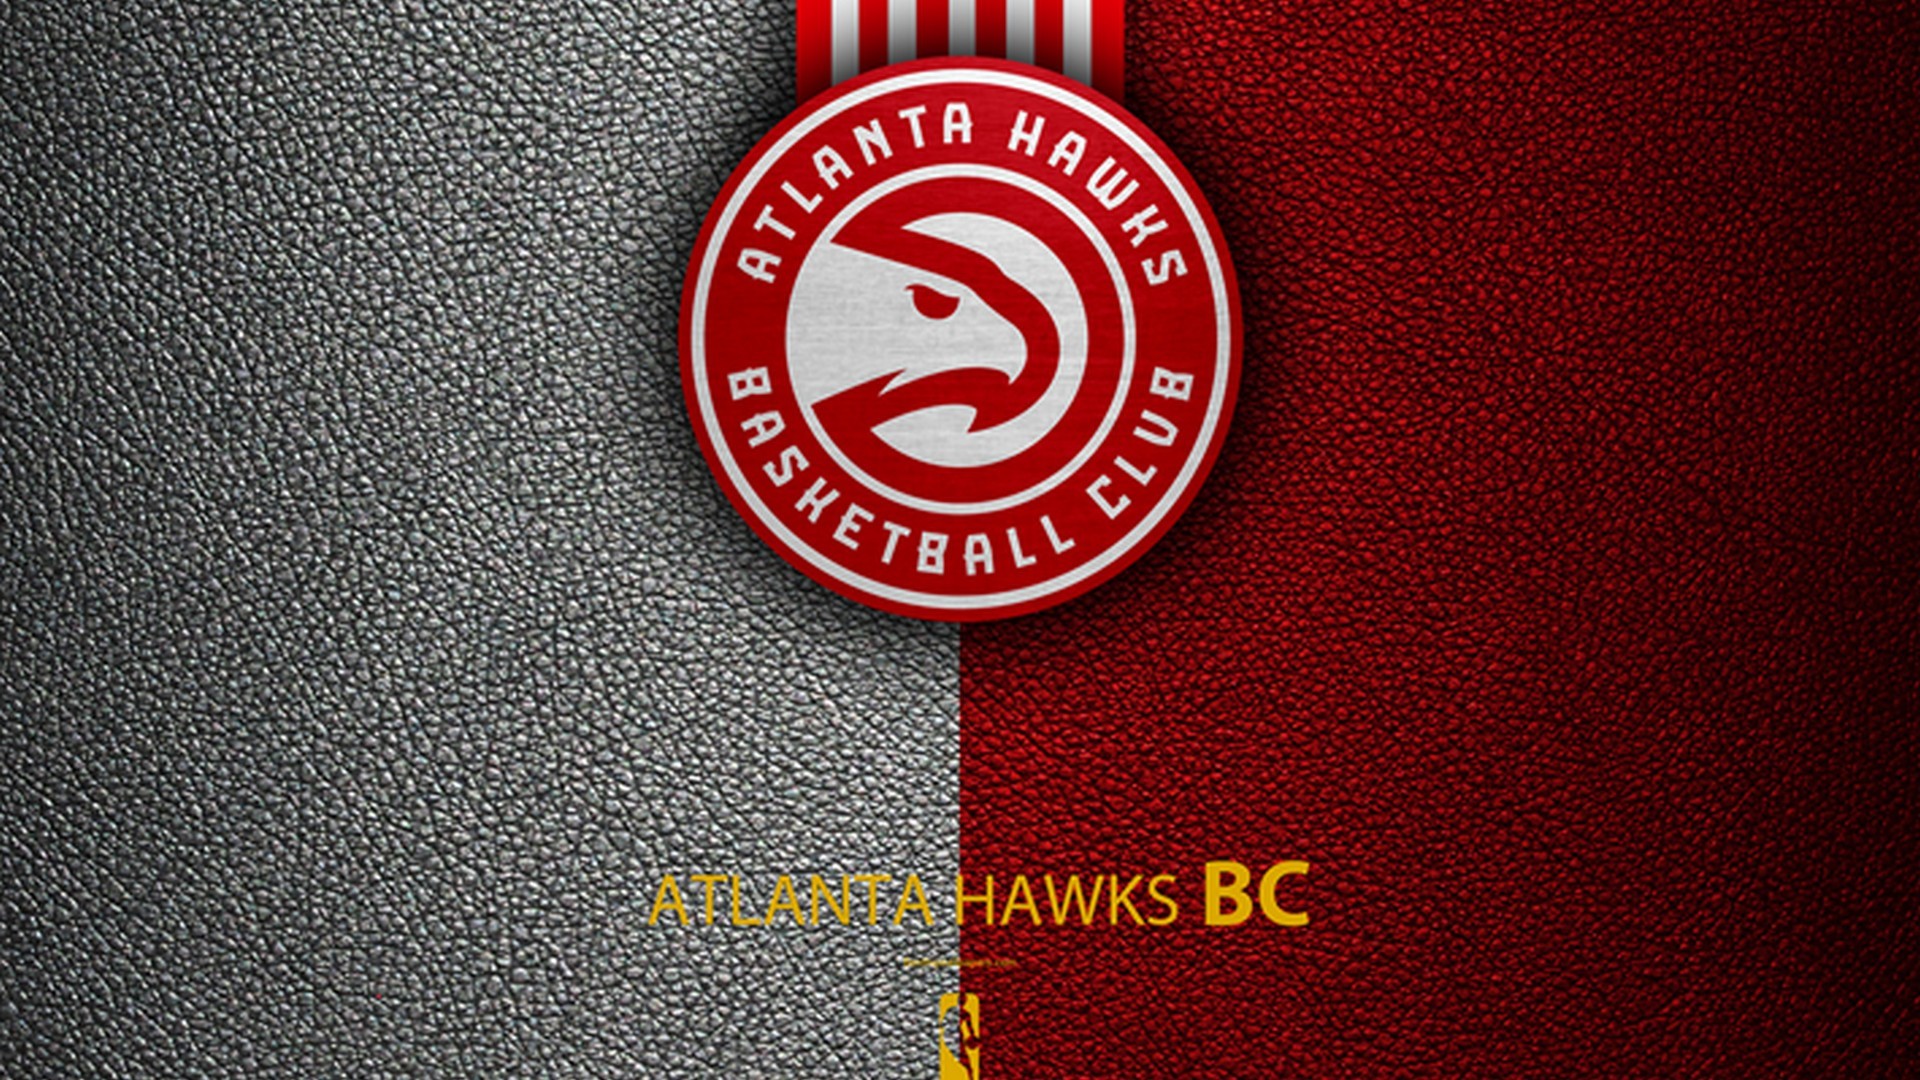 1920x1080 Atlanta Hawks Backgrounds HD with image dimensions  pixel. You can  make this wallpaper for